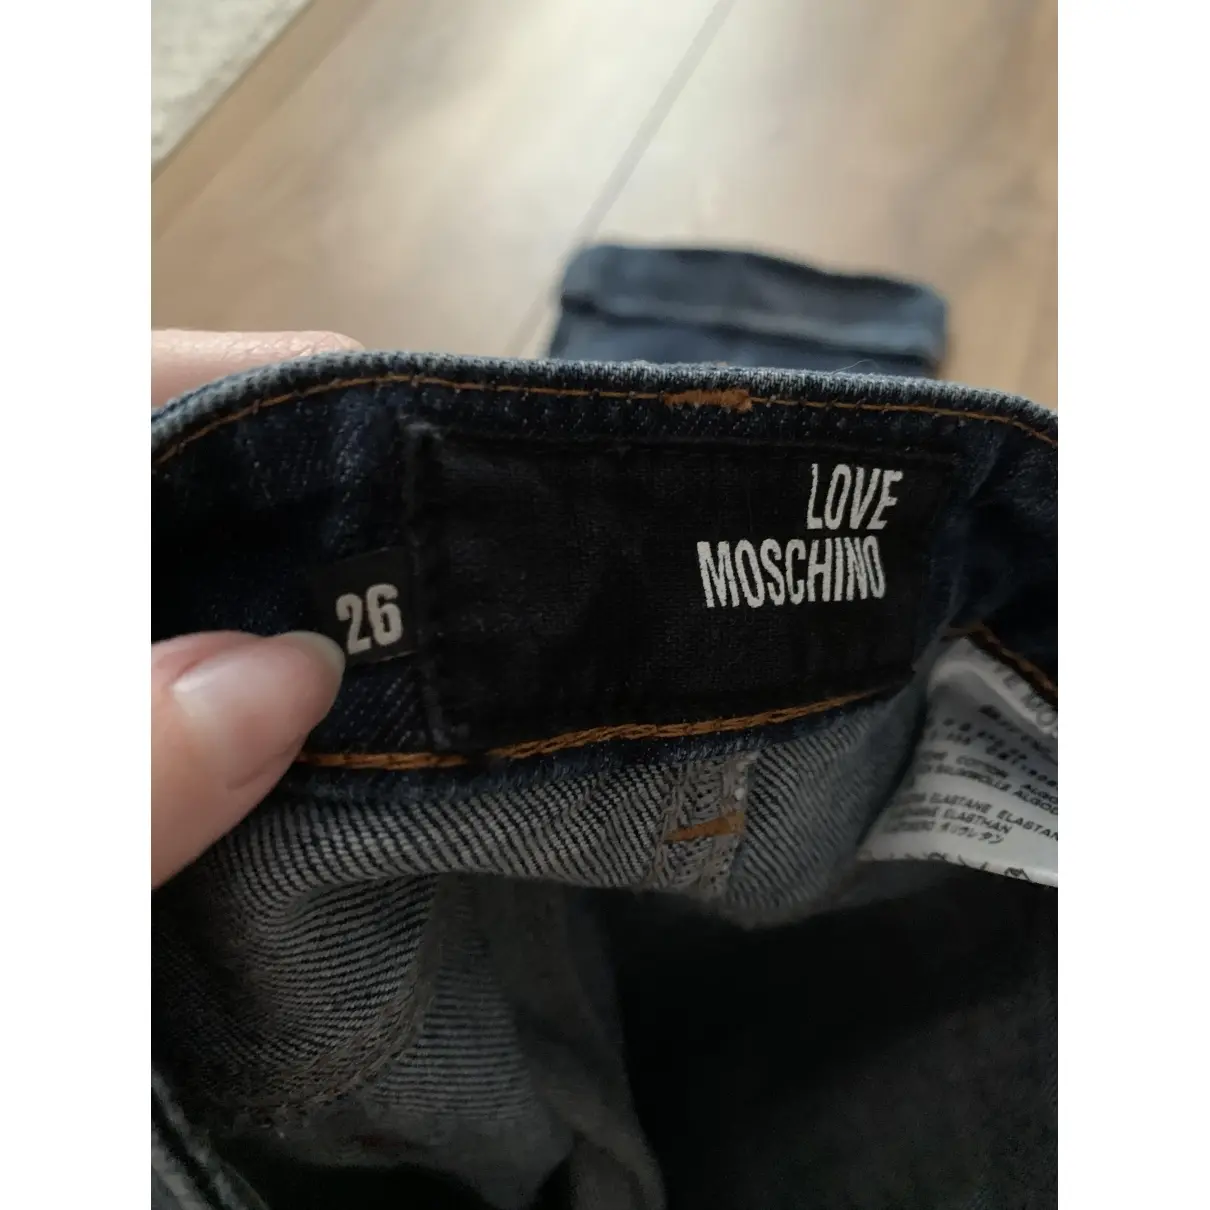 Buy Moschino Love Jeans online